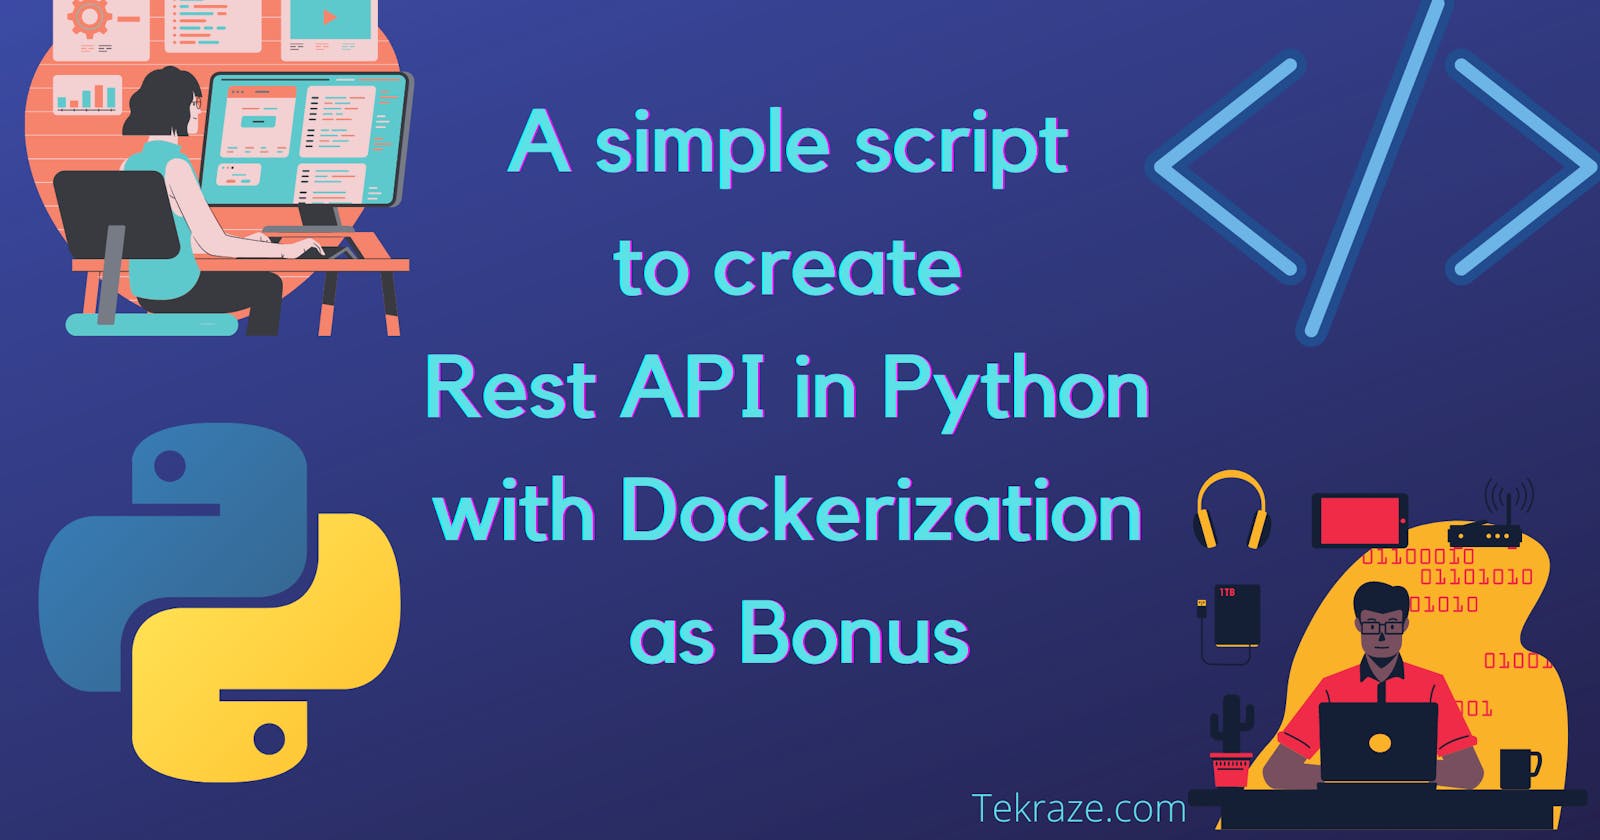 A simple script to create Rest API in Python with Dockerization as Bonus